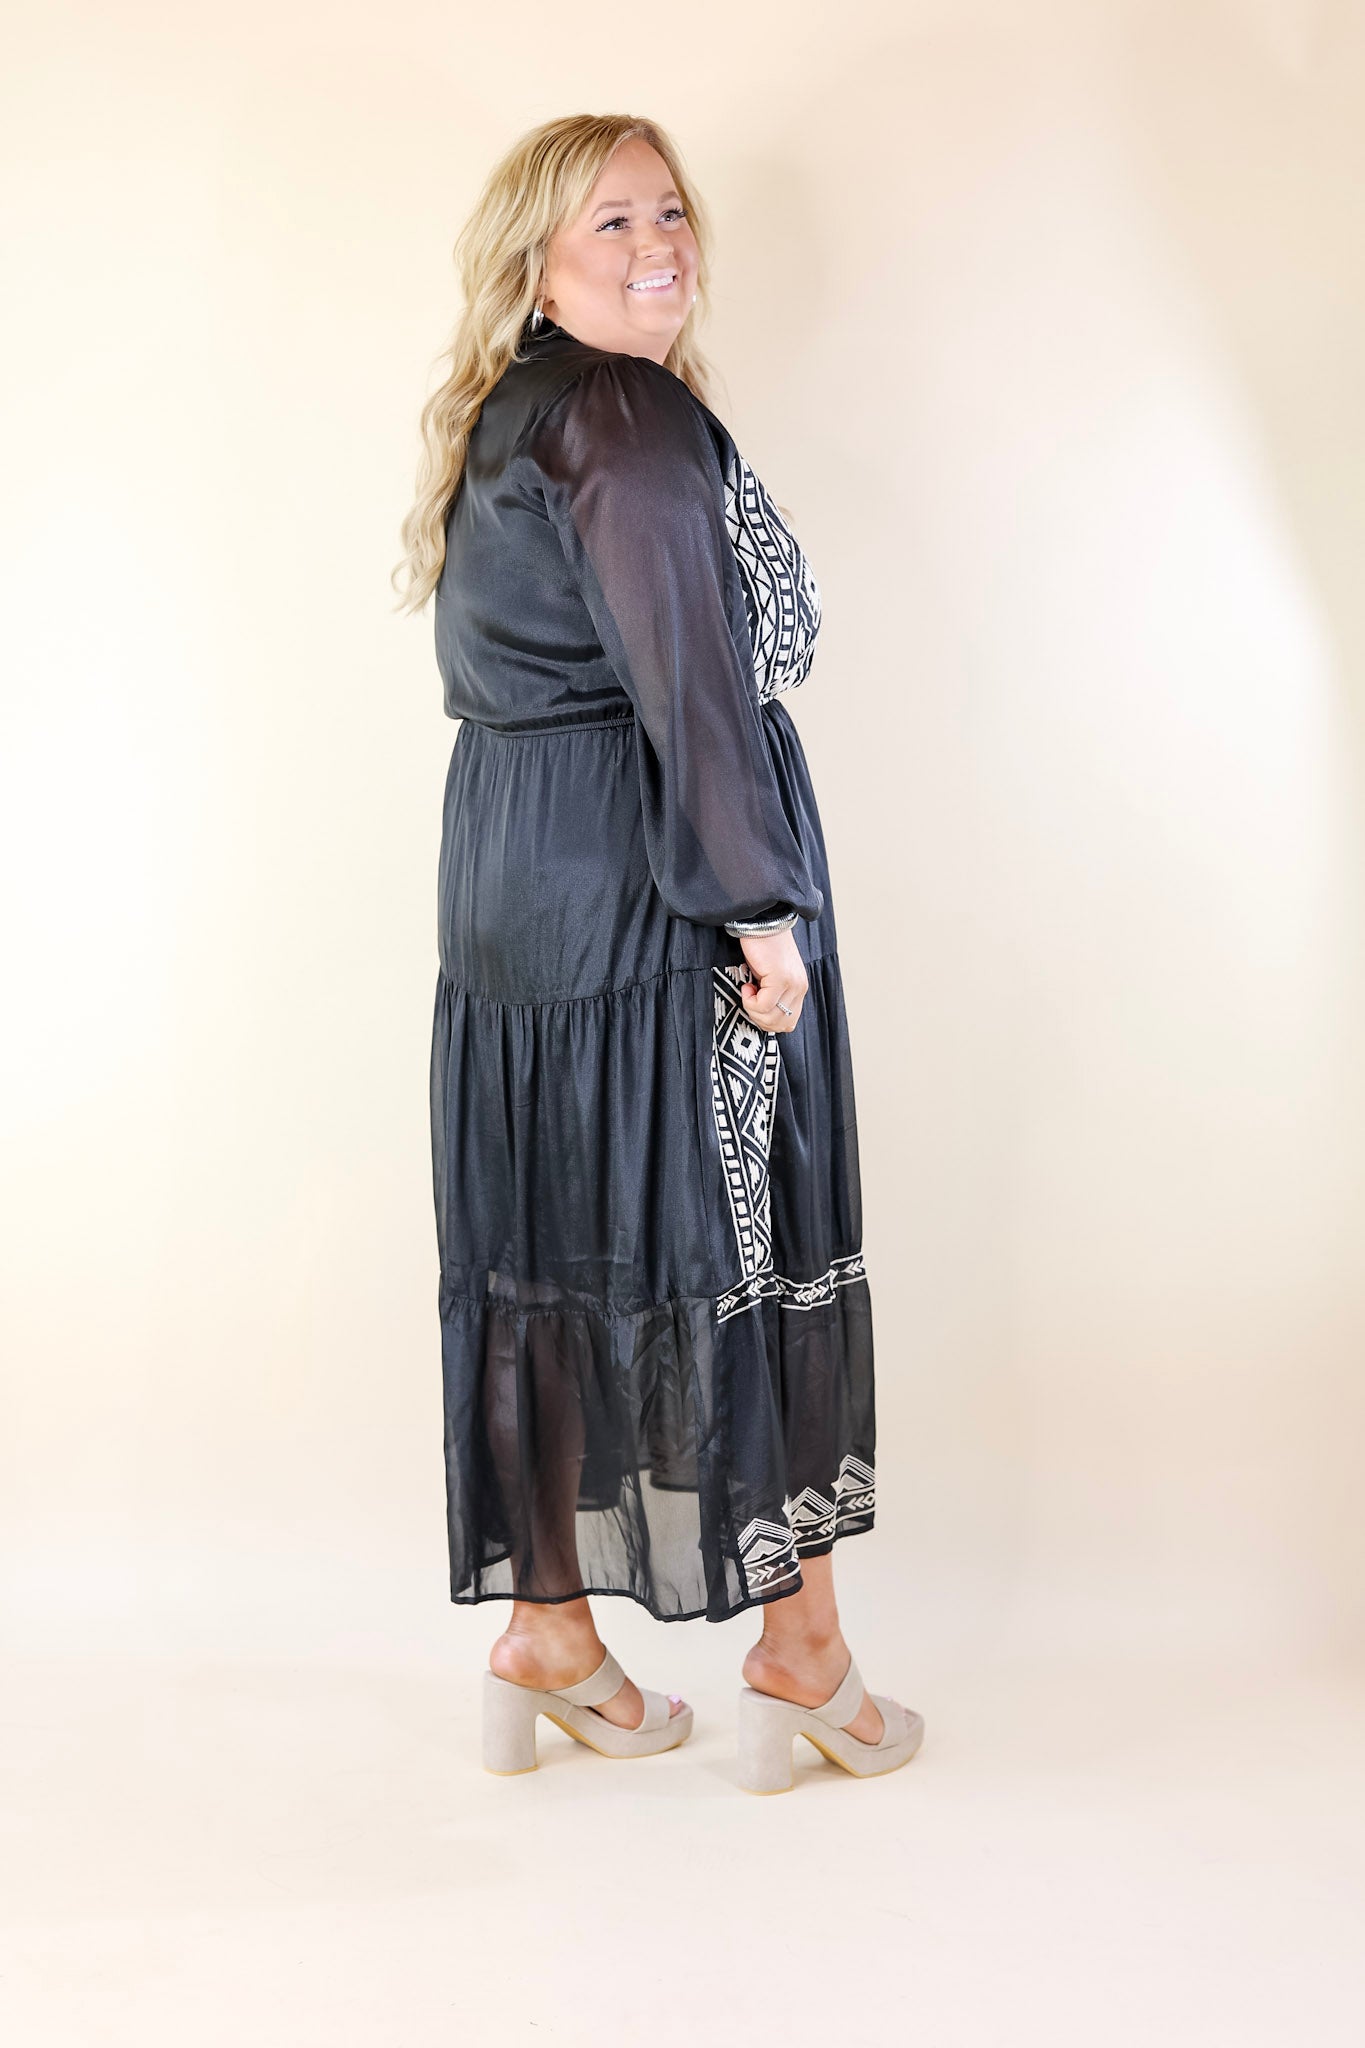 Bring The Drama Ivory Embroidered Maxi Dress with Long Sleeves in Black - Giddy Up Glamour Boutique